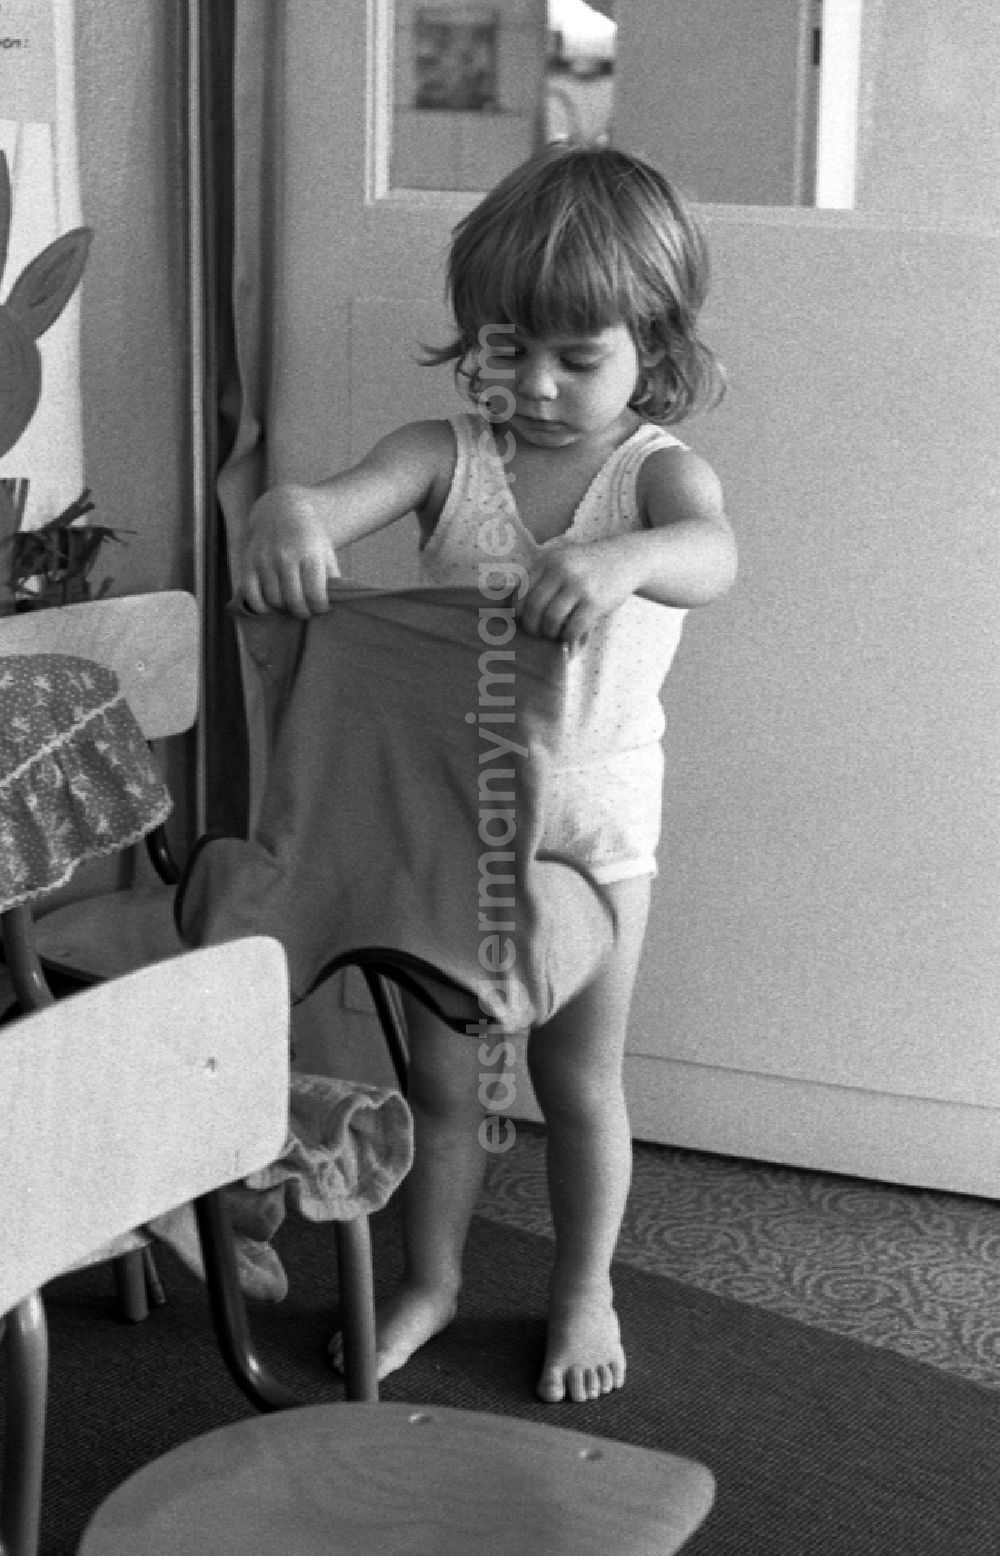 GDR picture archive: Berlin - Preparing for a nap in the kindergarten in Berlin Eastberlin on the territory of the former GDR, German Democratic Republic. Toddler tries to undress on his own and pulls on his sock or stocking. Toddler undresses and puts a T-shirt over a chair